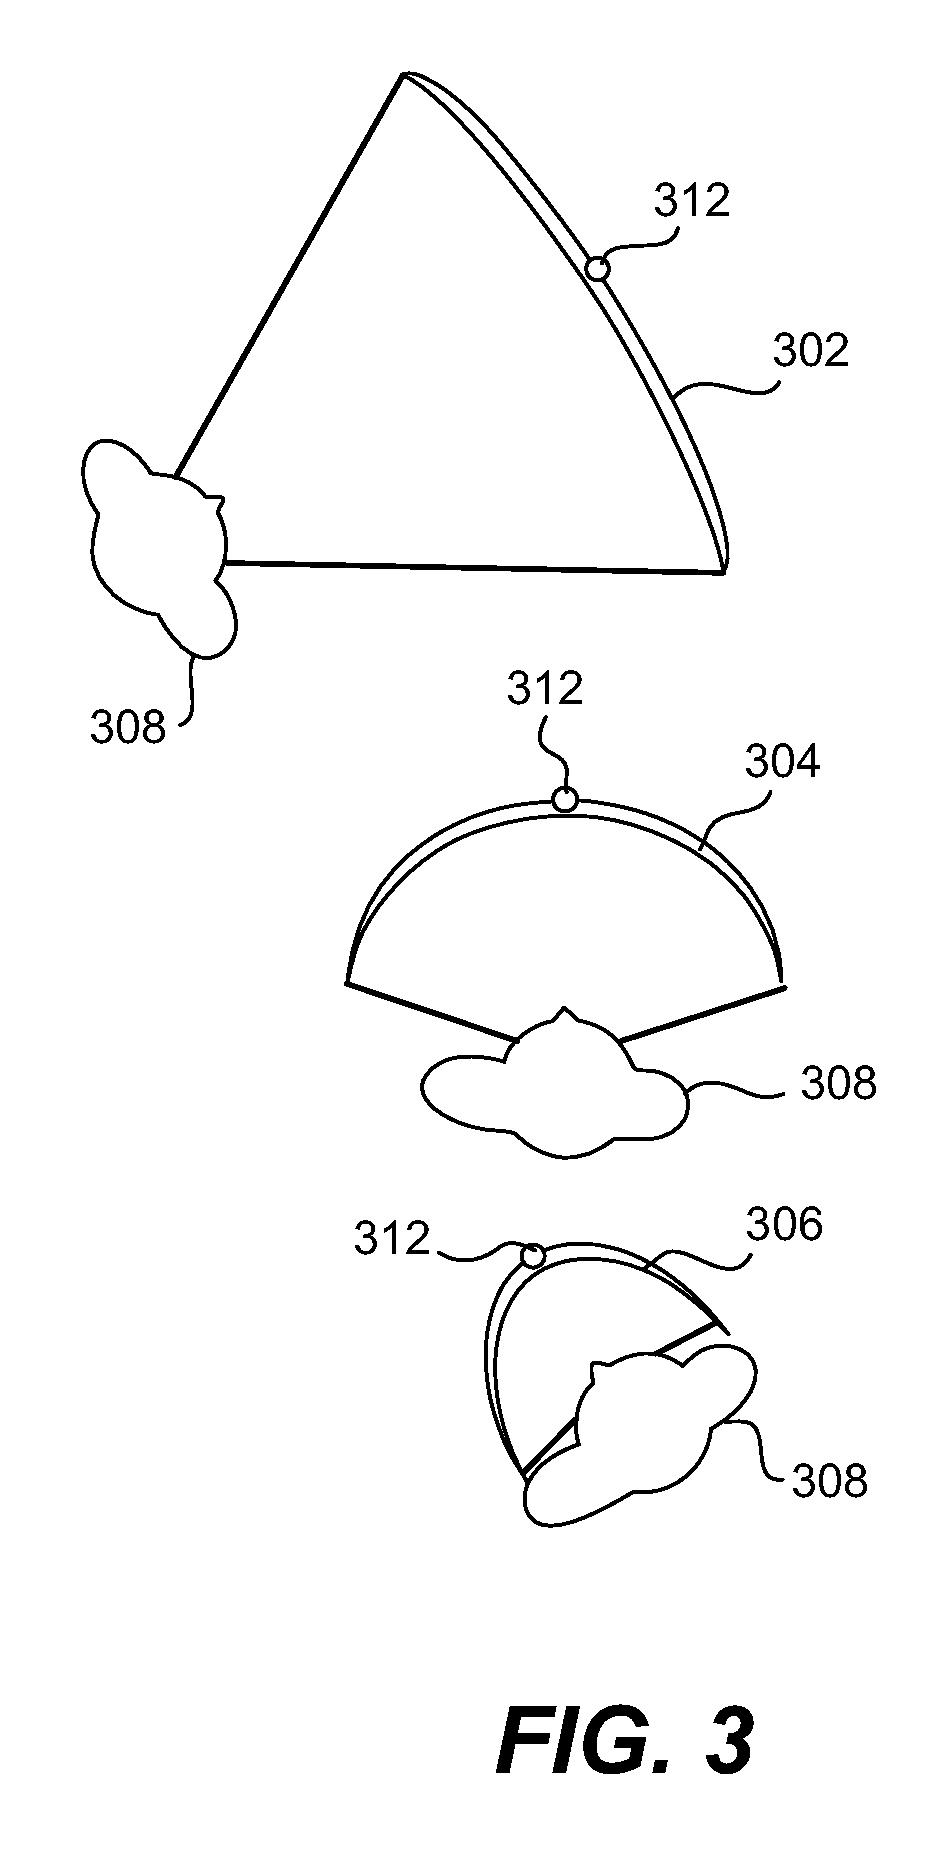 Actuated adaptive display systems